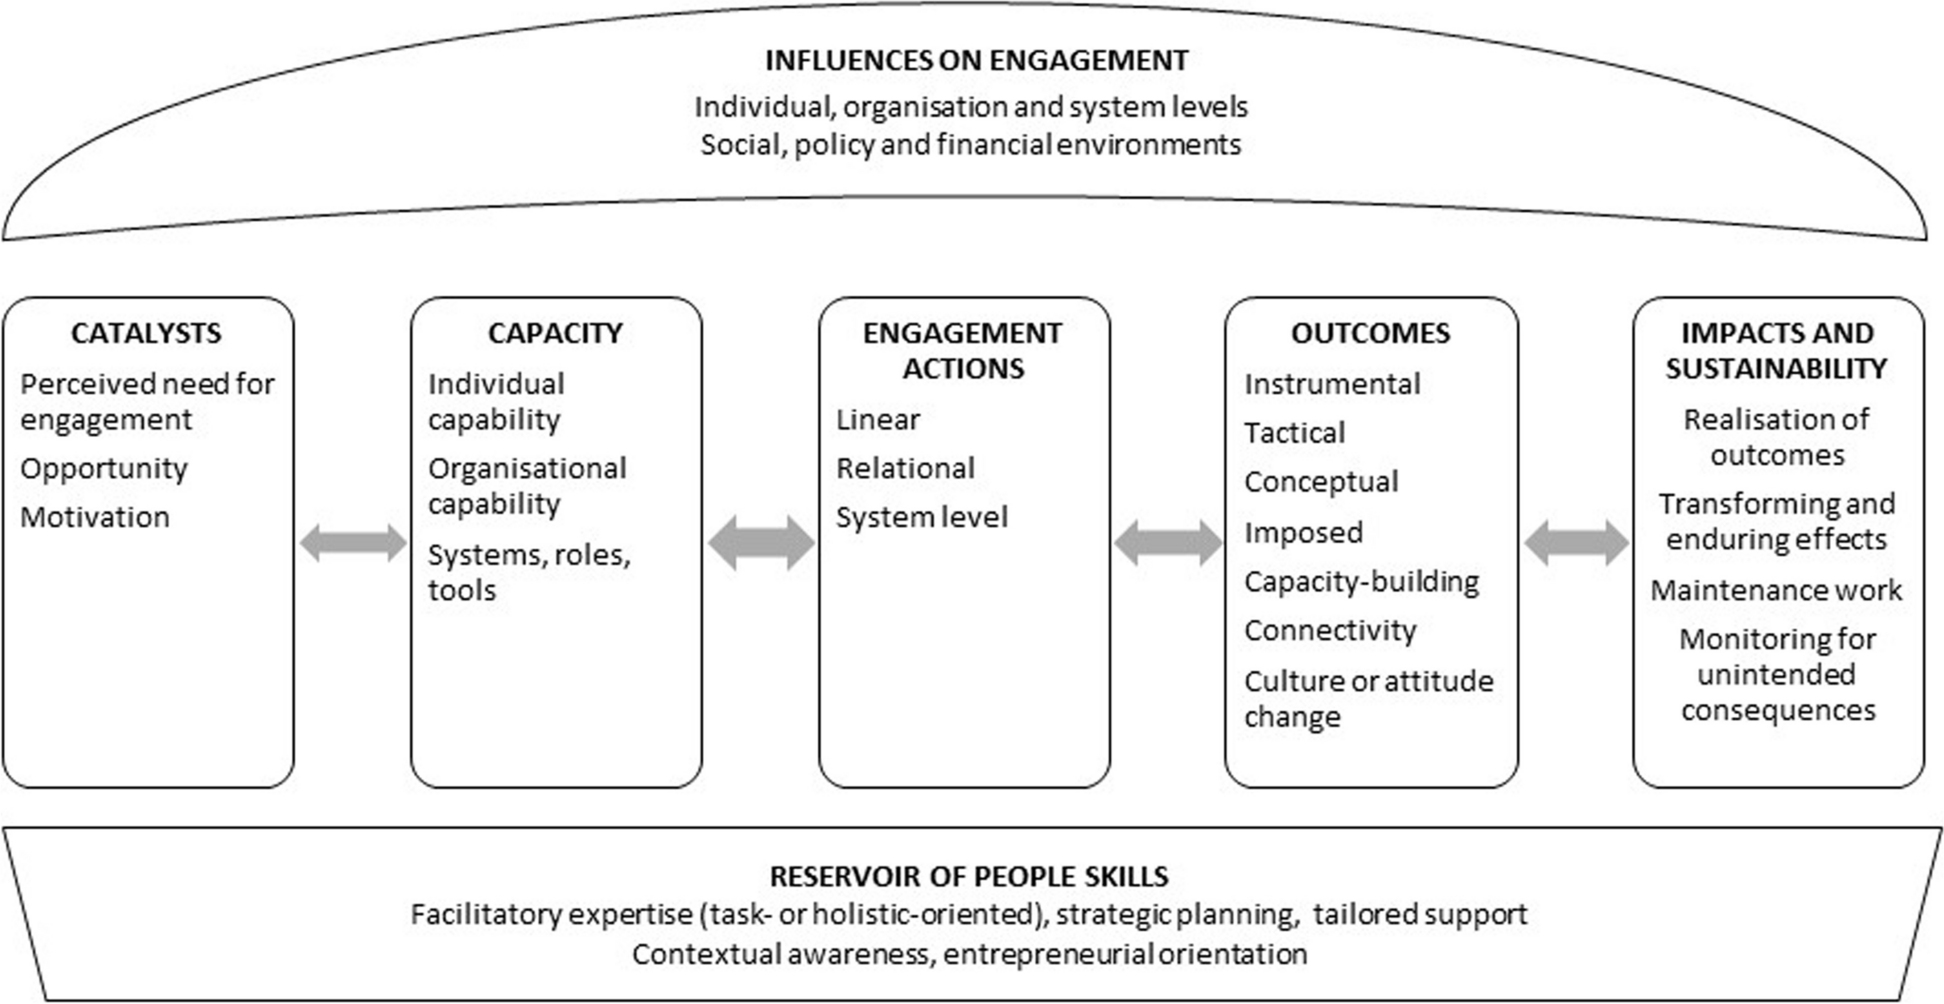 A modified action framework to develop and evaluate academic-policy engagement interventions